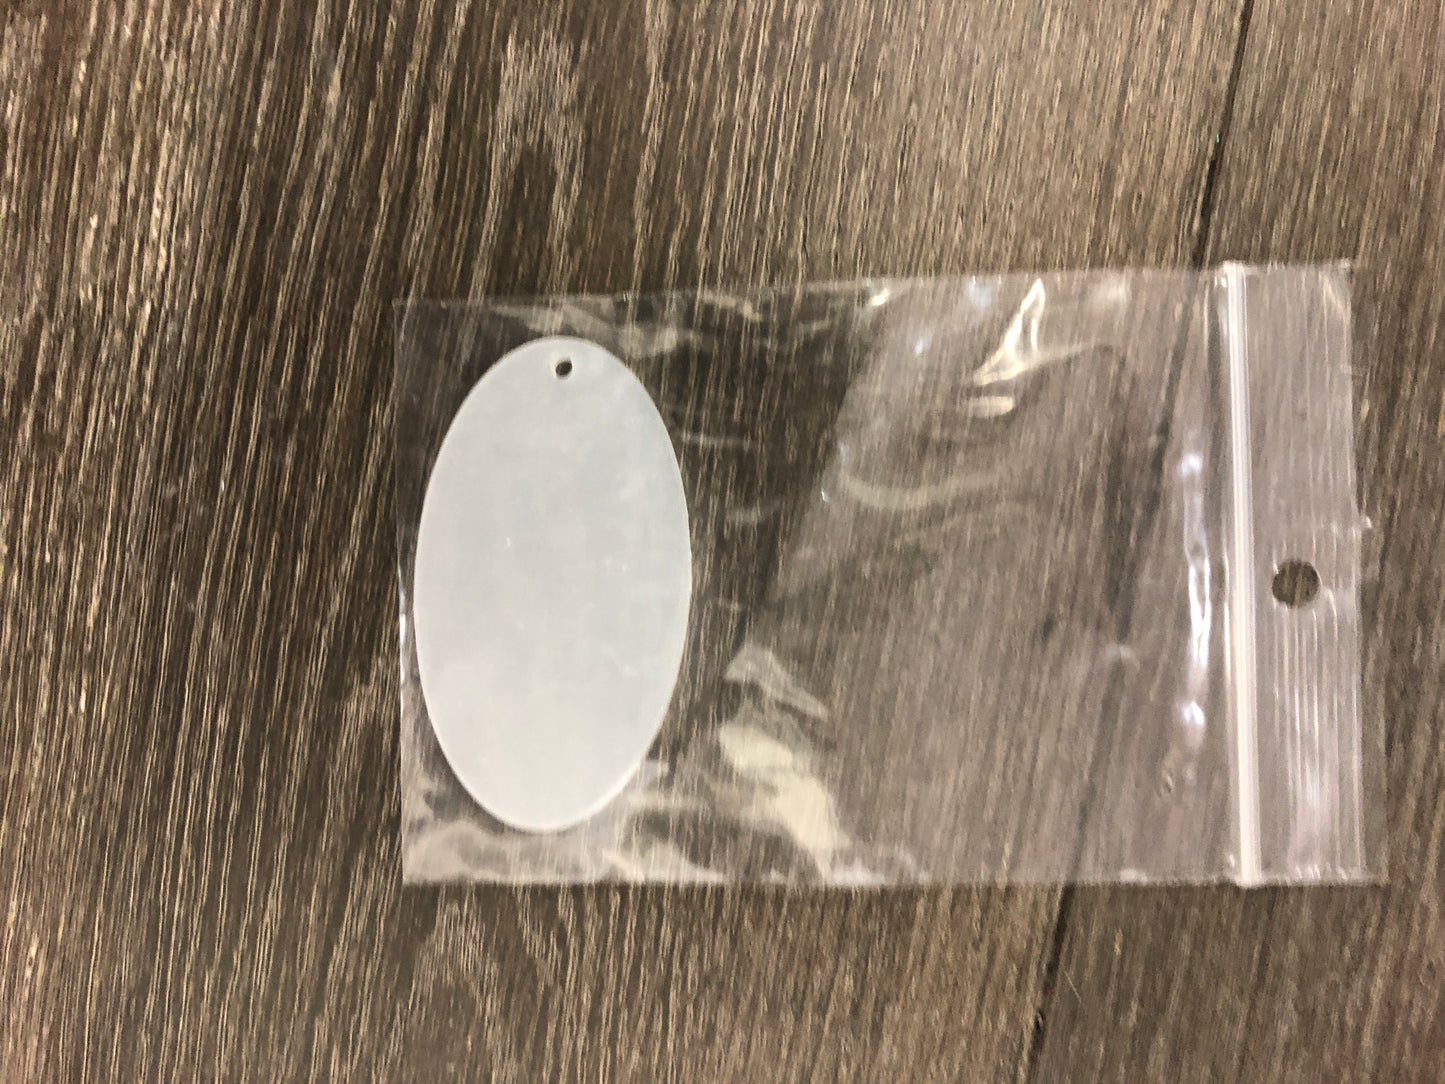 Acrylic Oval Disc with Hole for keyring